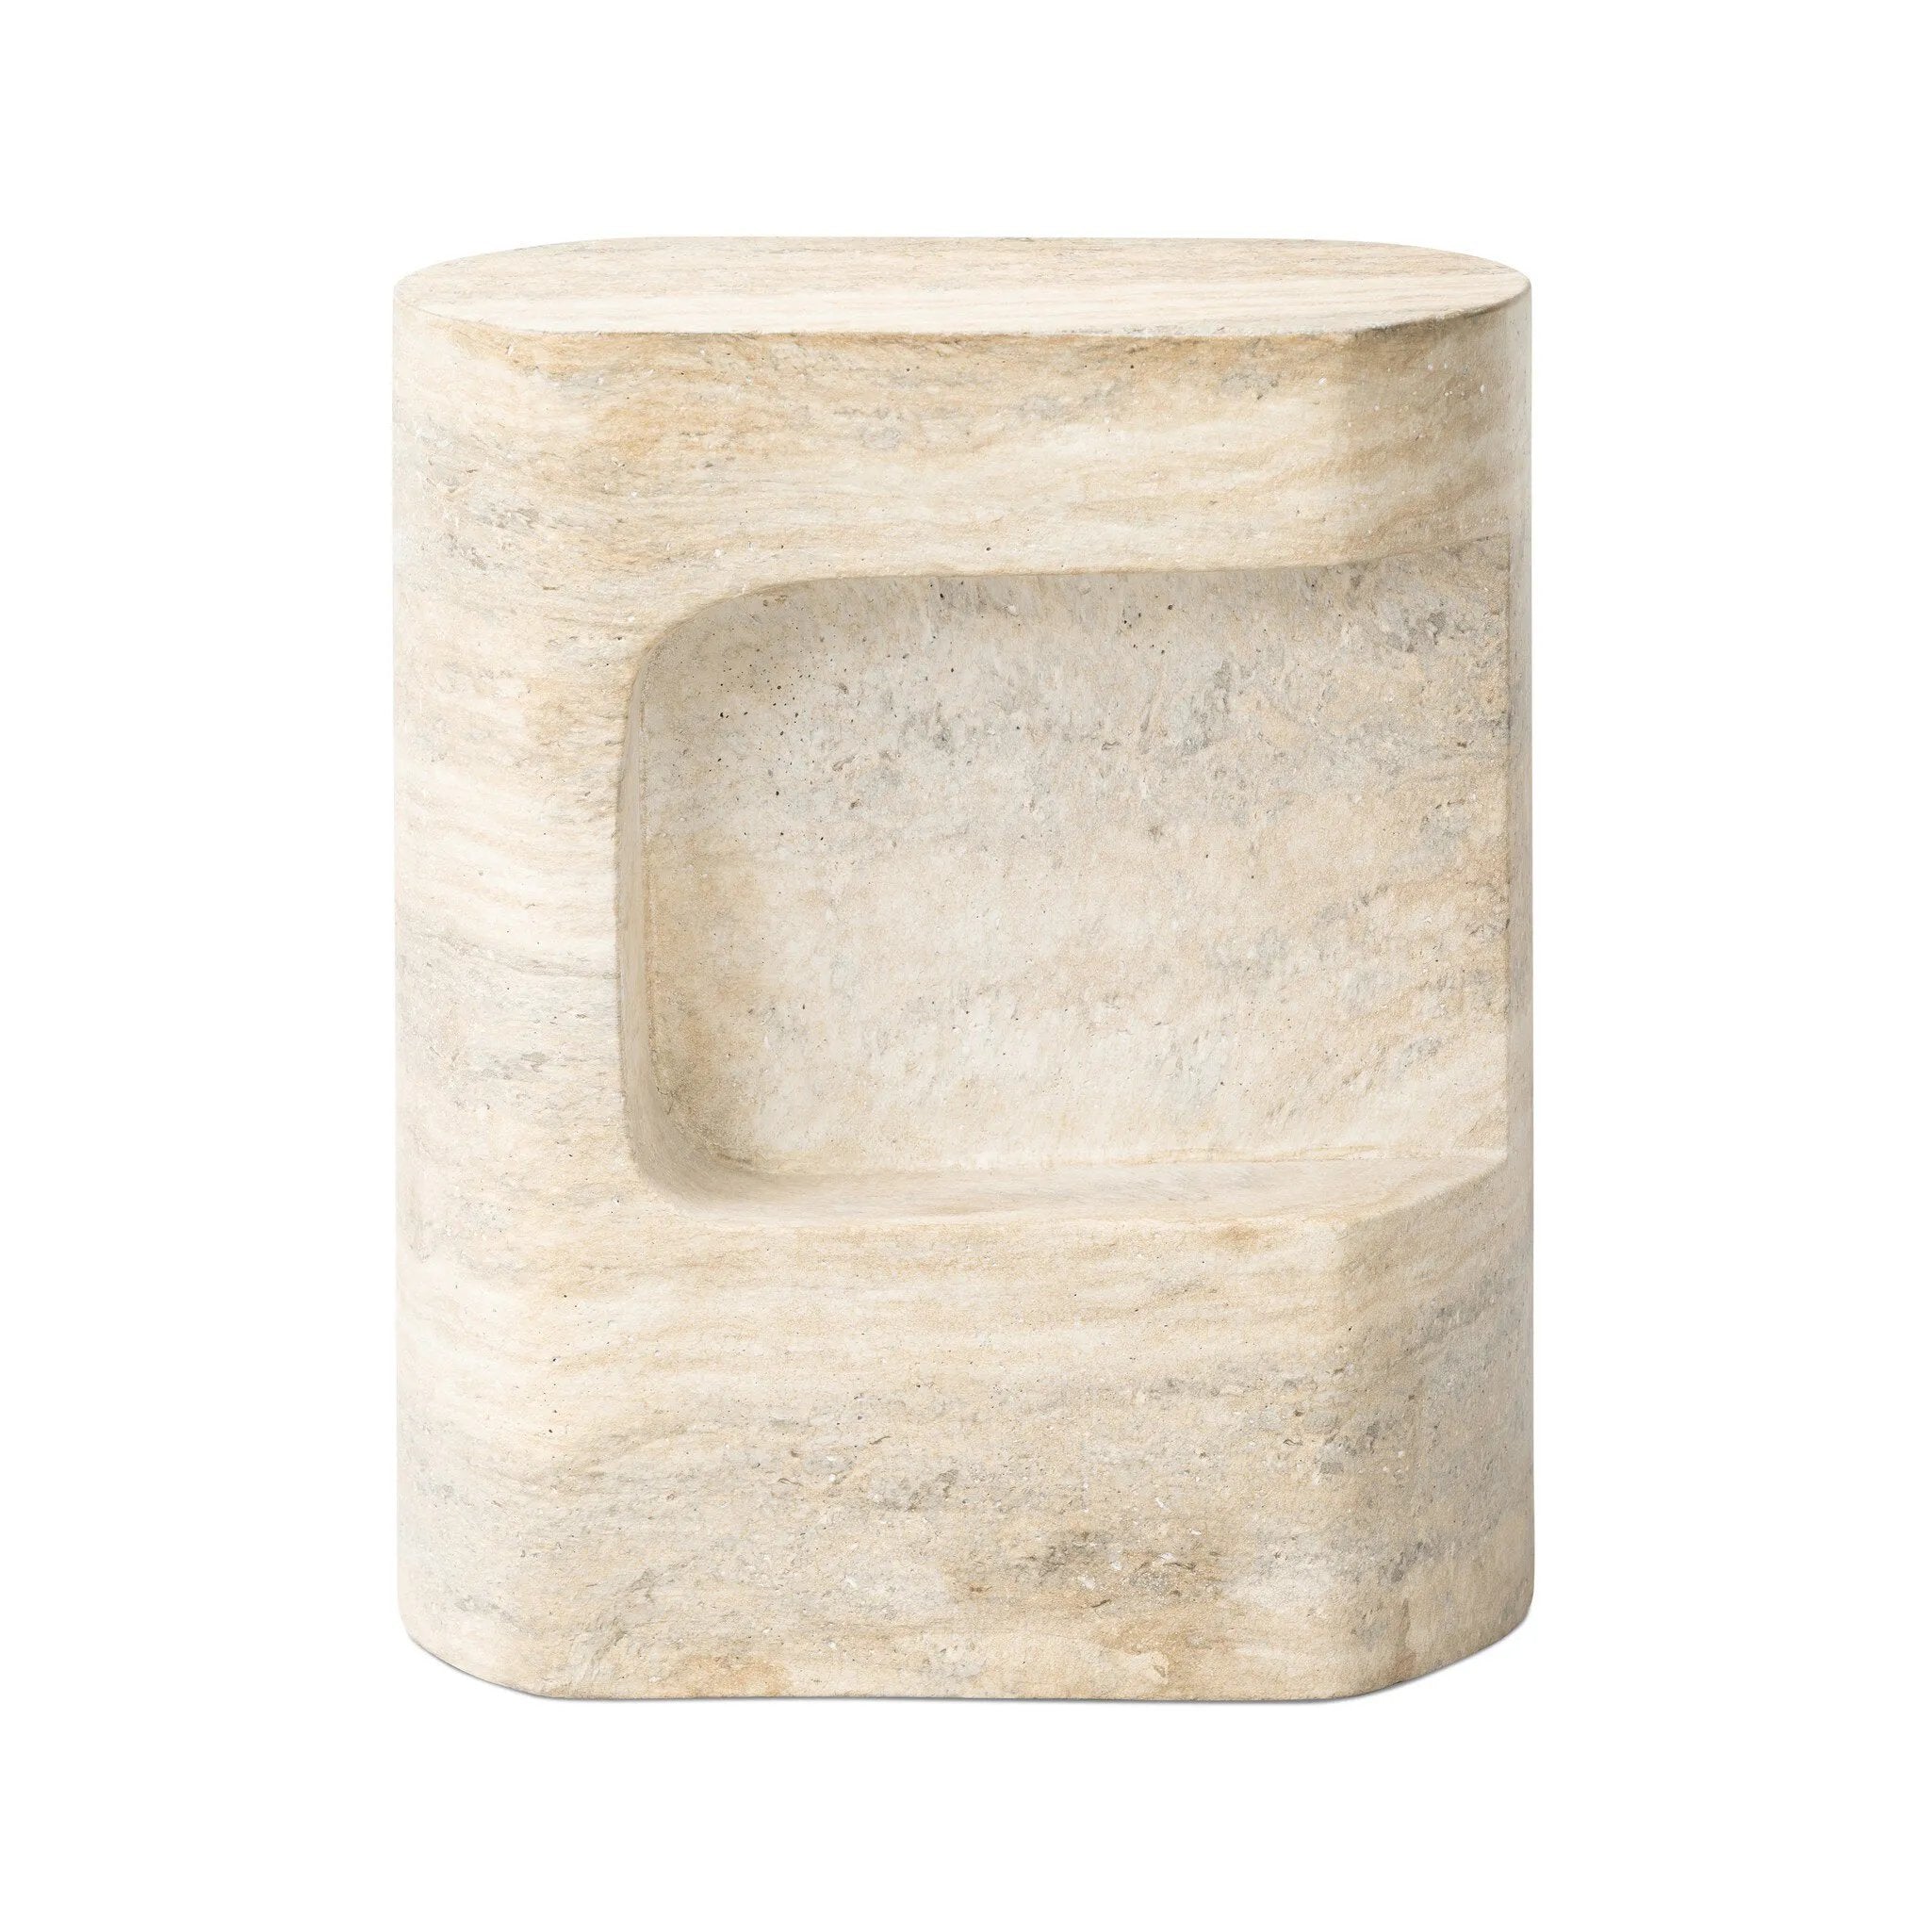 Cutout detailing brings a clean, modern vibe to a versatile end table of cast concrete. A water transfer finish creates a textured look and sandy hue resembling natural travertine.Collection: Chandle Amethyst Home provides interior design, new home construction design consulting, vintage area rugs, and lighting in the Omaha metro area.